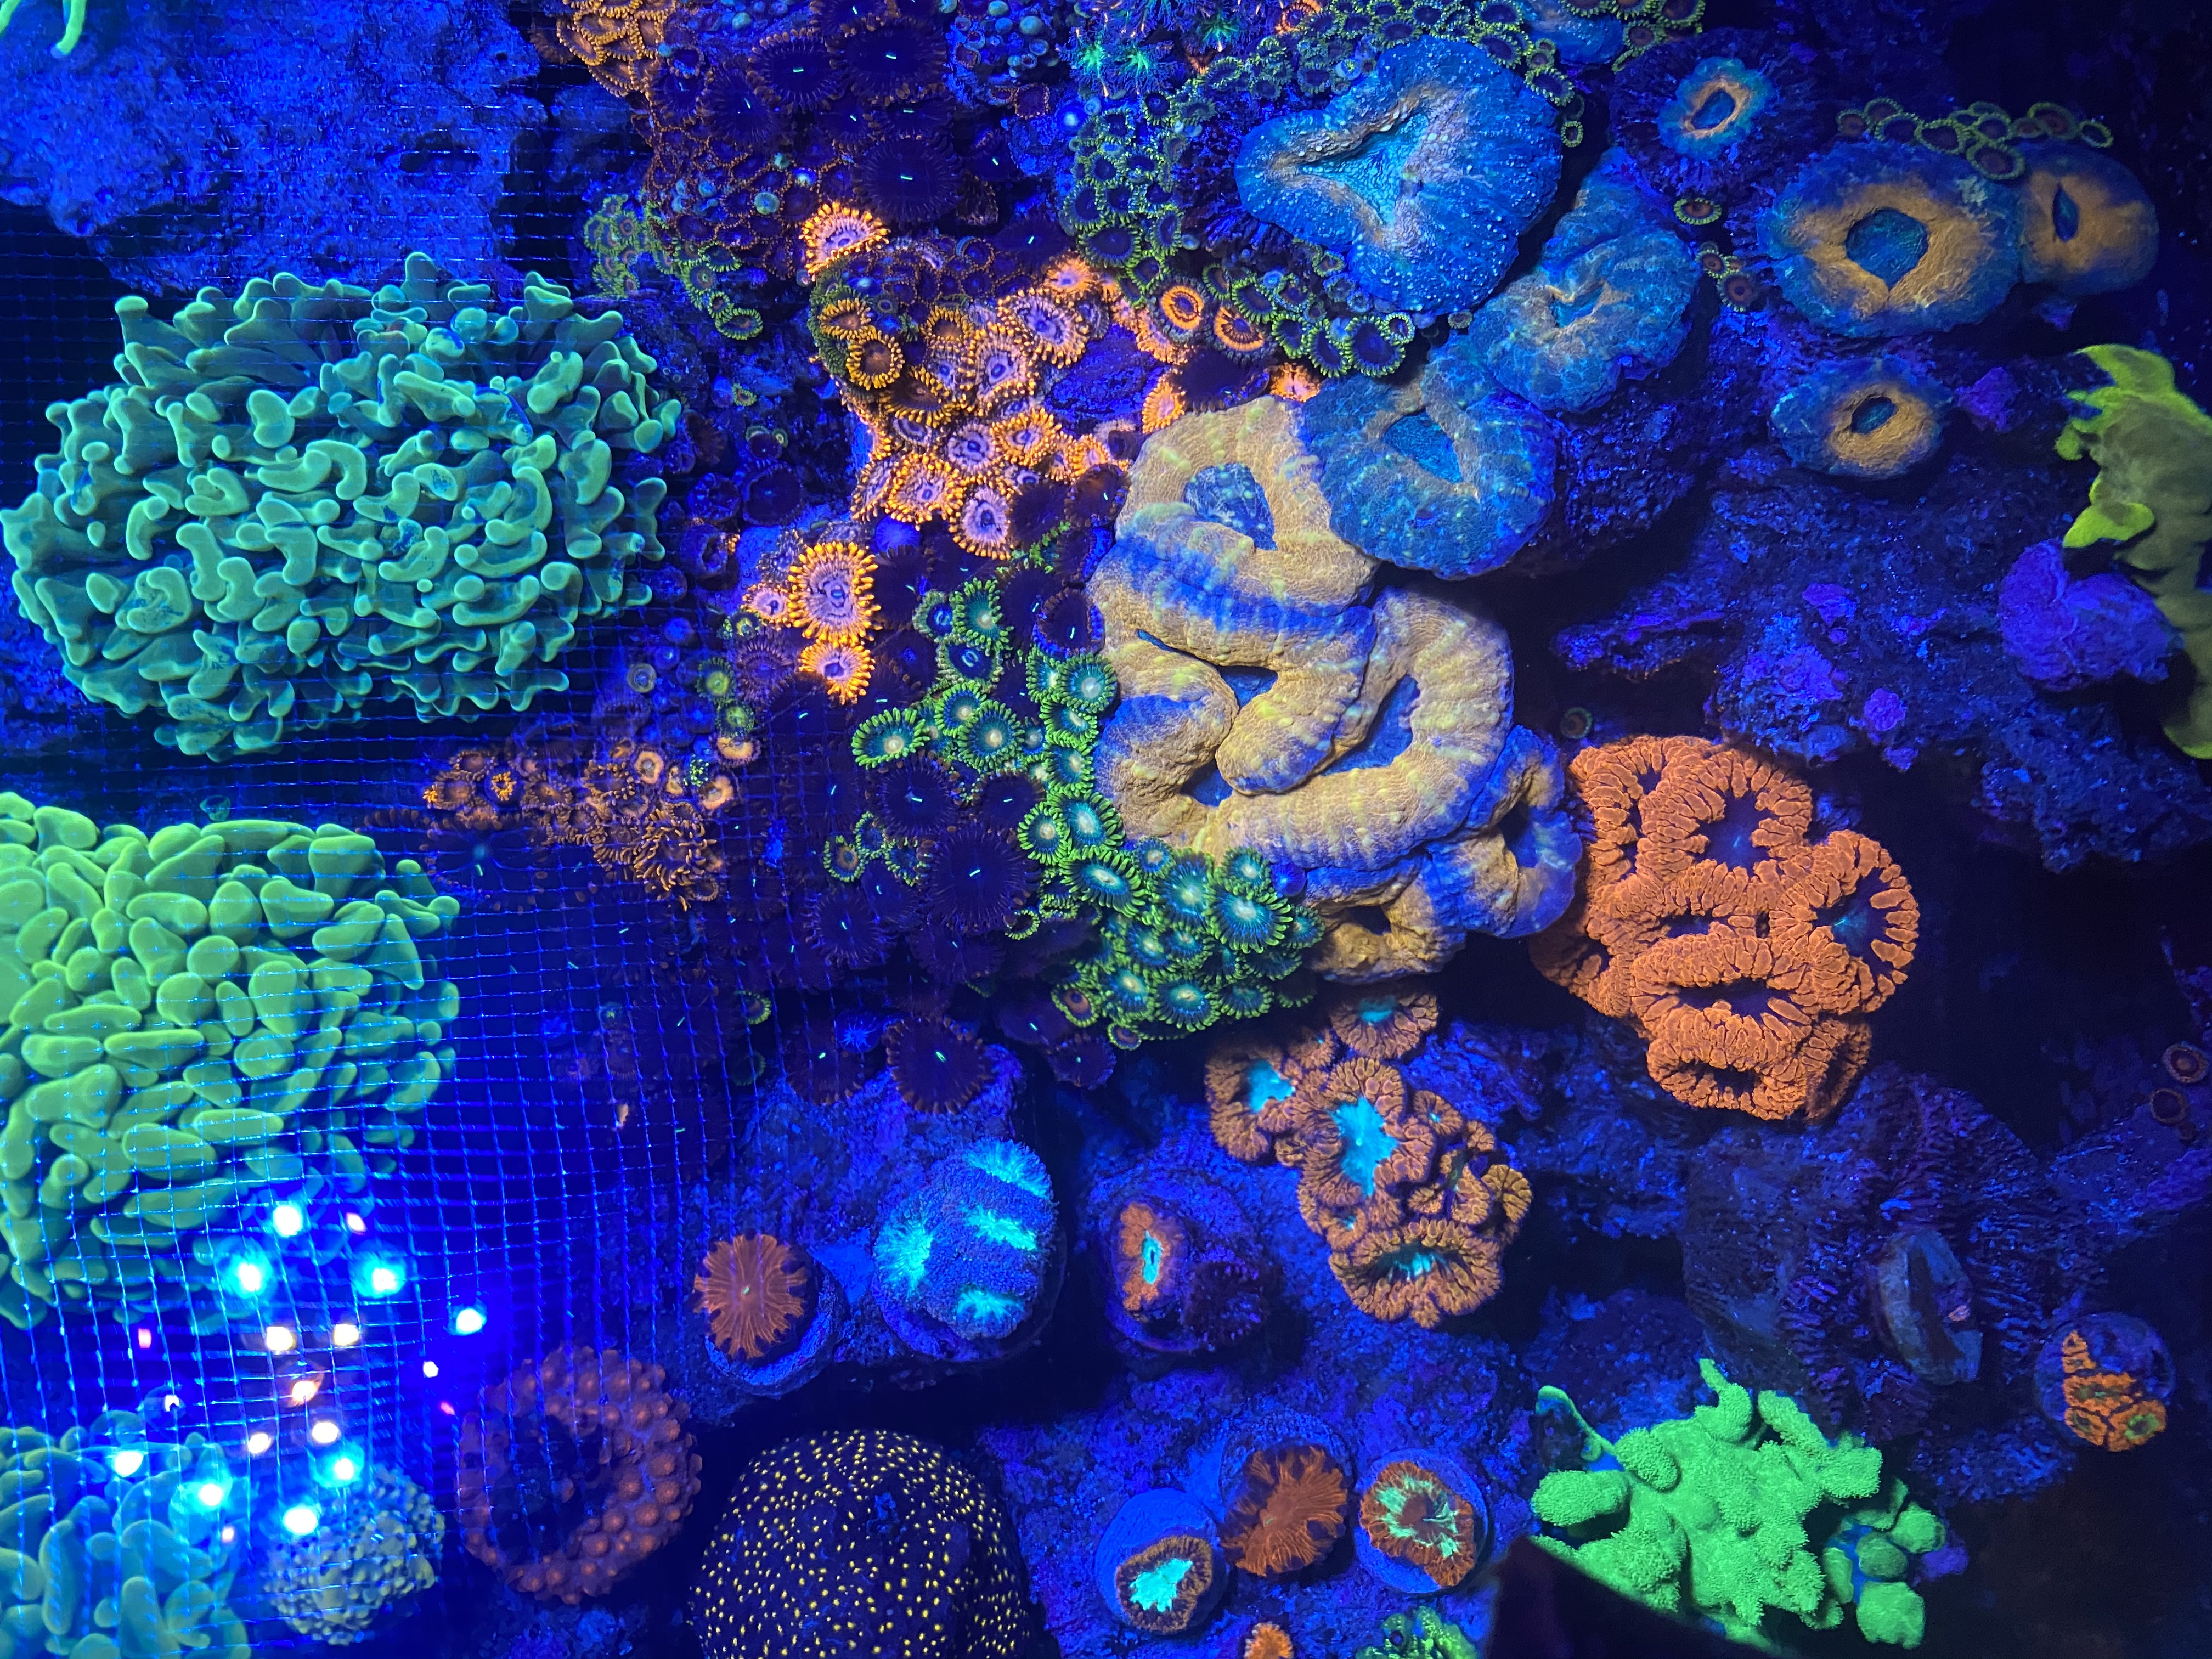 Most LPS corals do not require the flow of SPS or soft corals, but it should still be strong enough to keep detritus from settling on them.